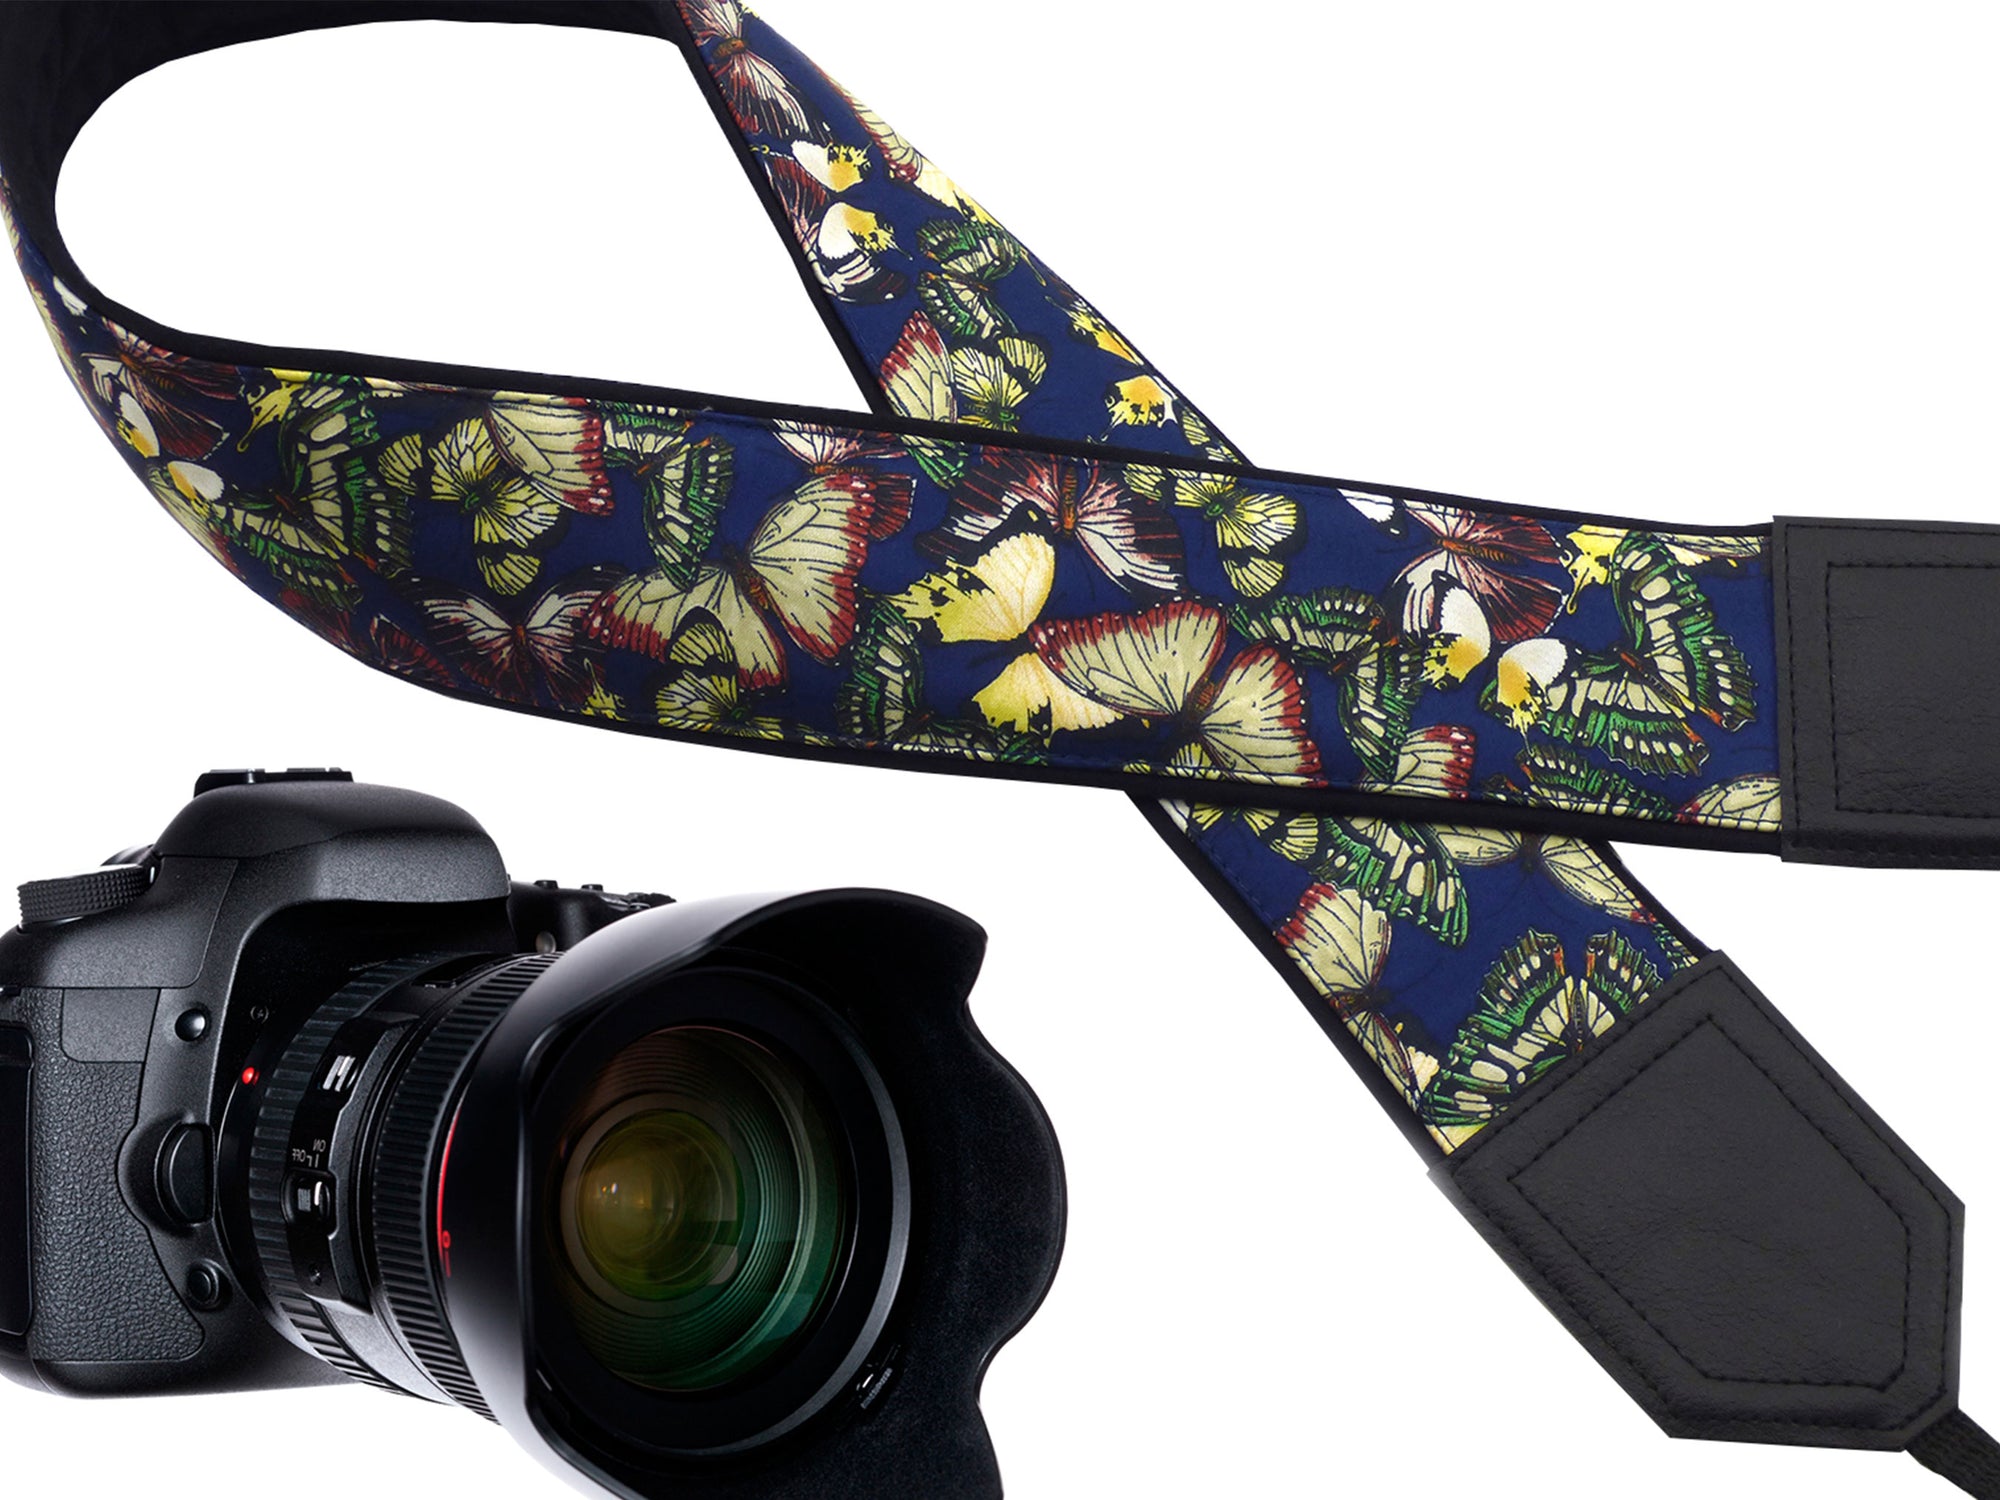 InTePro butterfly camera strap with padding for DSLR and mirrorless cameras. Photo accessory and great gift for photographers and travelers